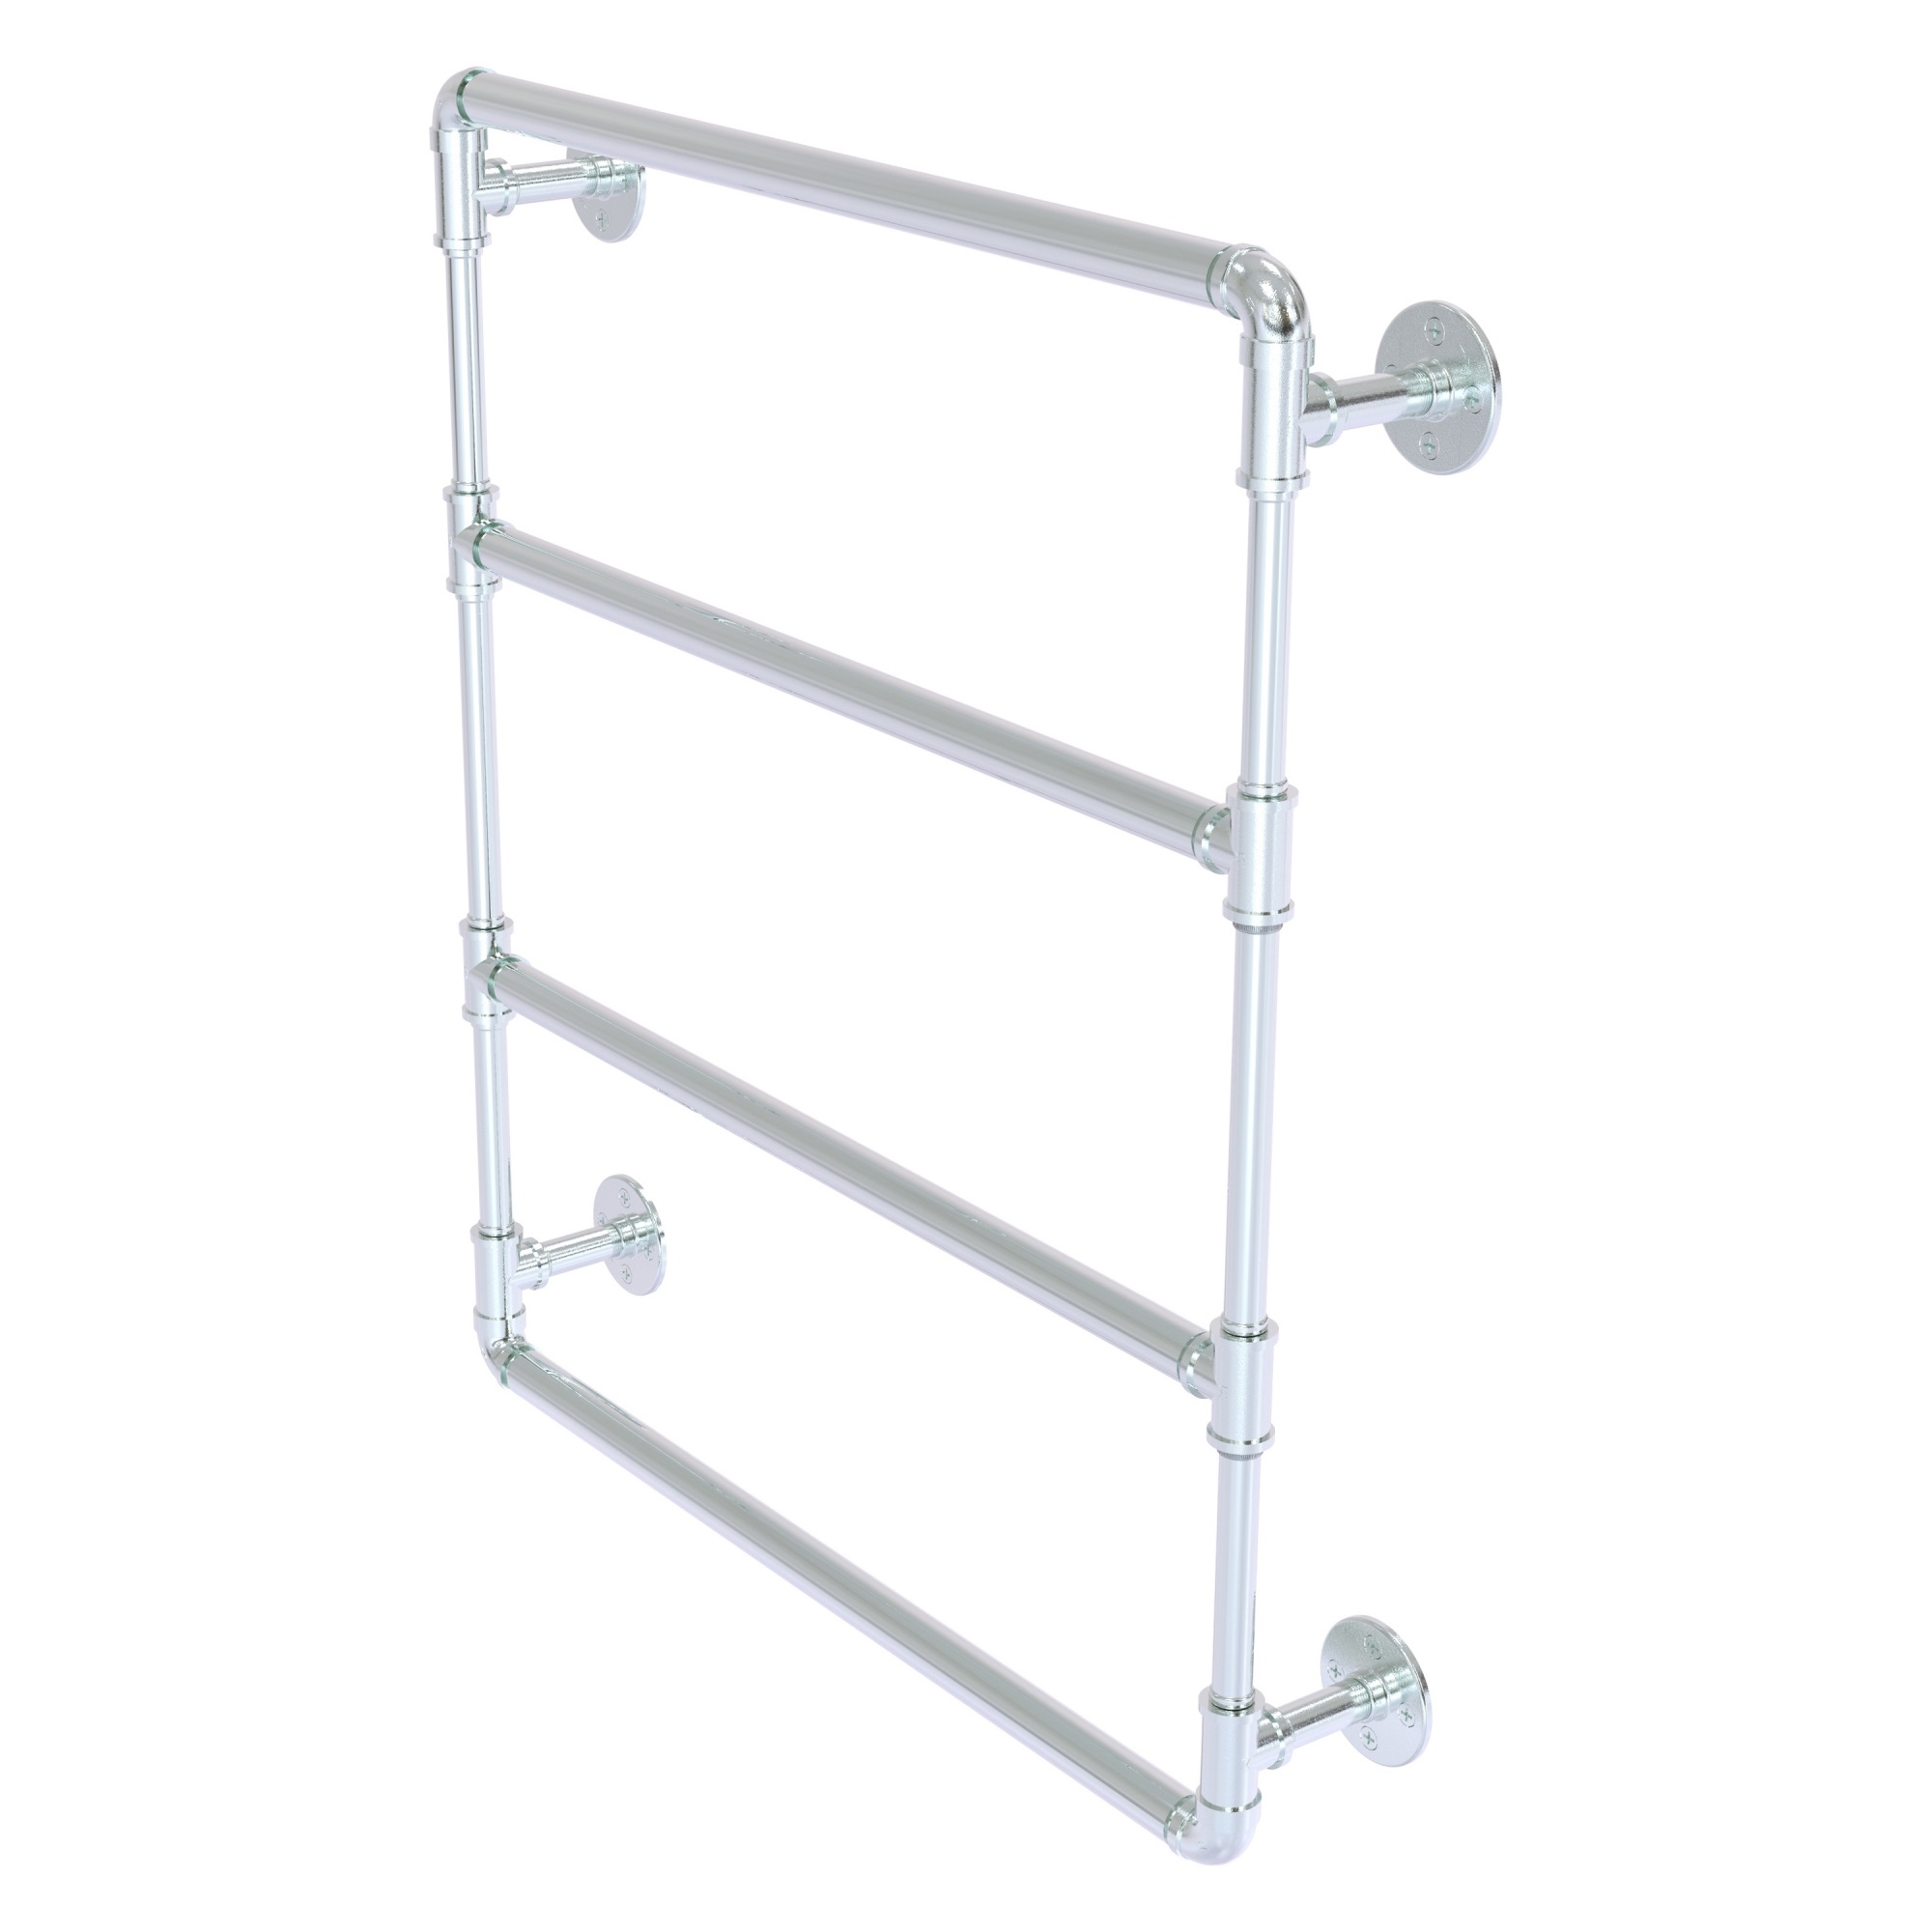 Pipeline Collection 24 Inch Wall Mounted Ladder Towel Bar - image 1 of 1